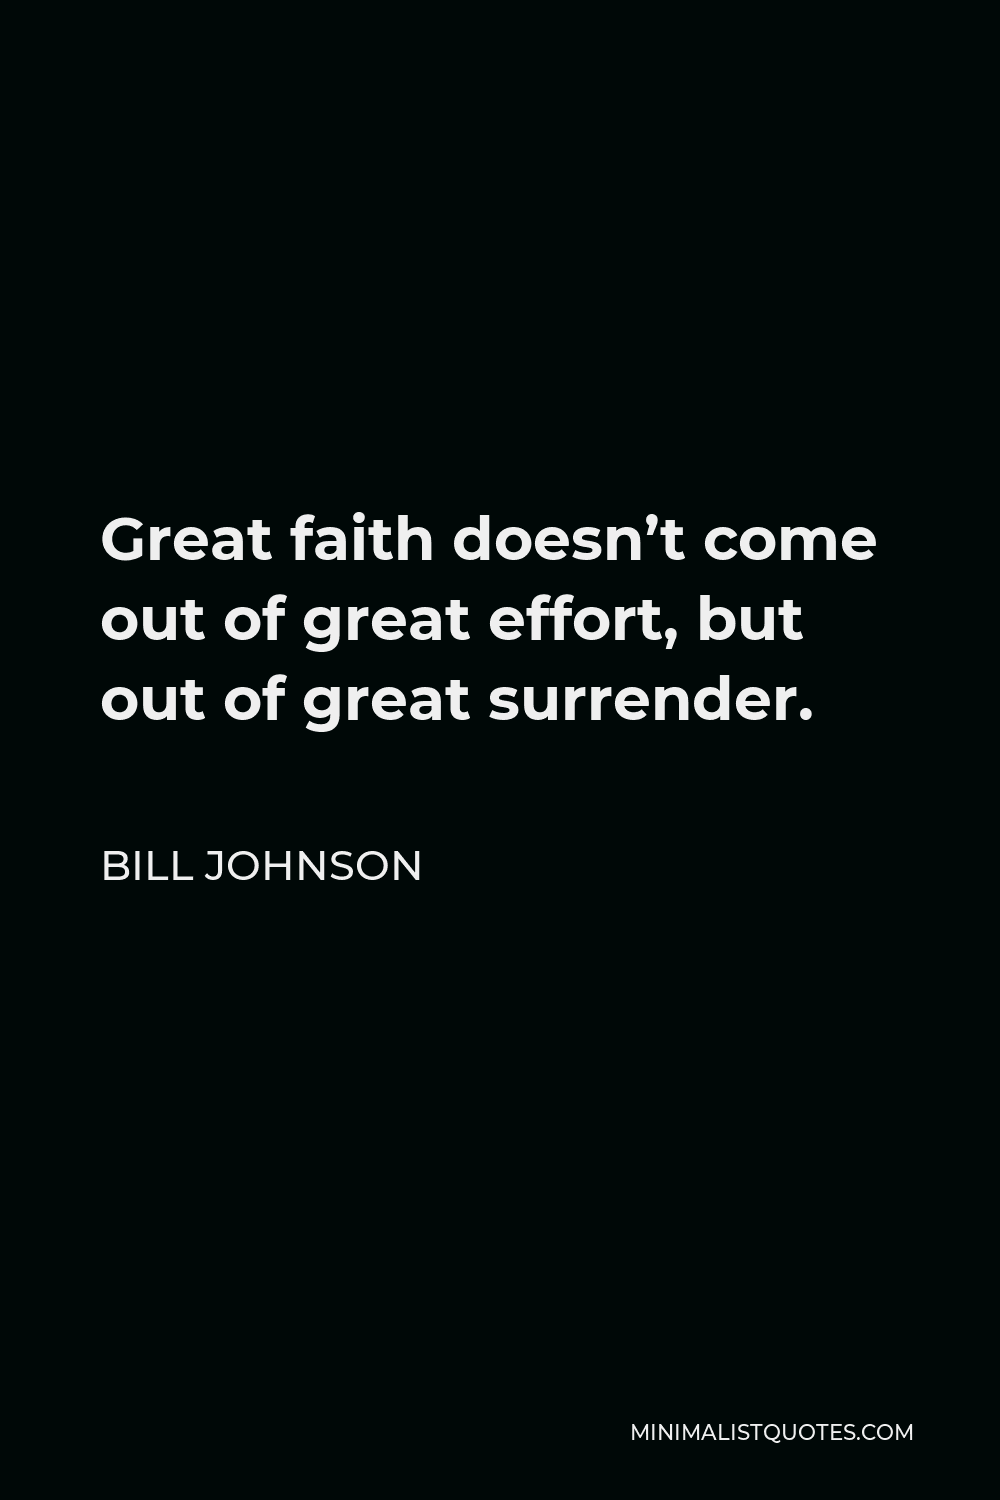 Bill Johnson Quote - Great faith doesn’t come out of great effort, but out of great surrender.